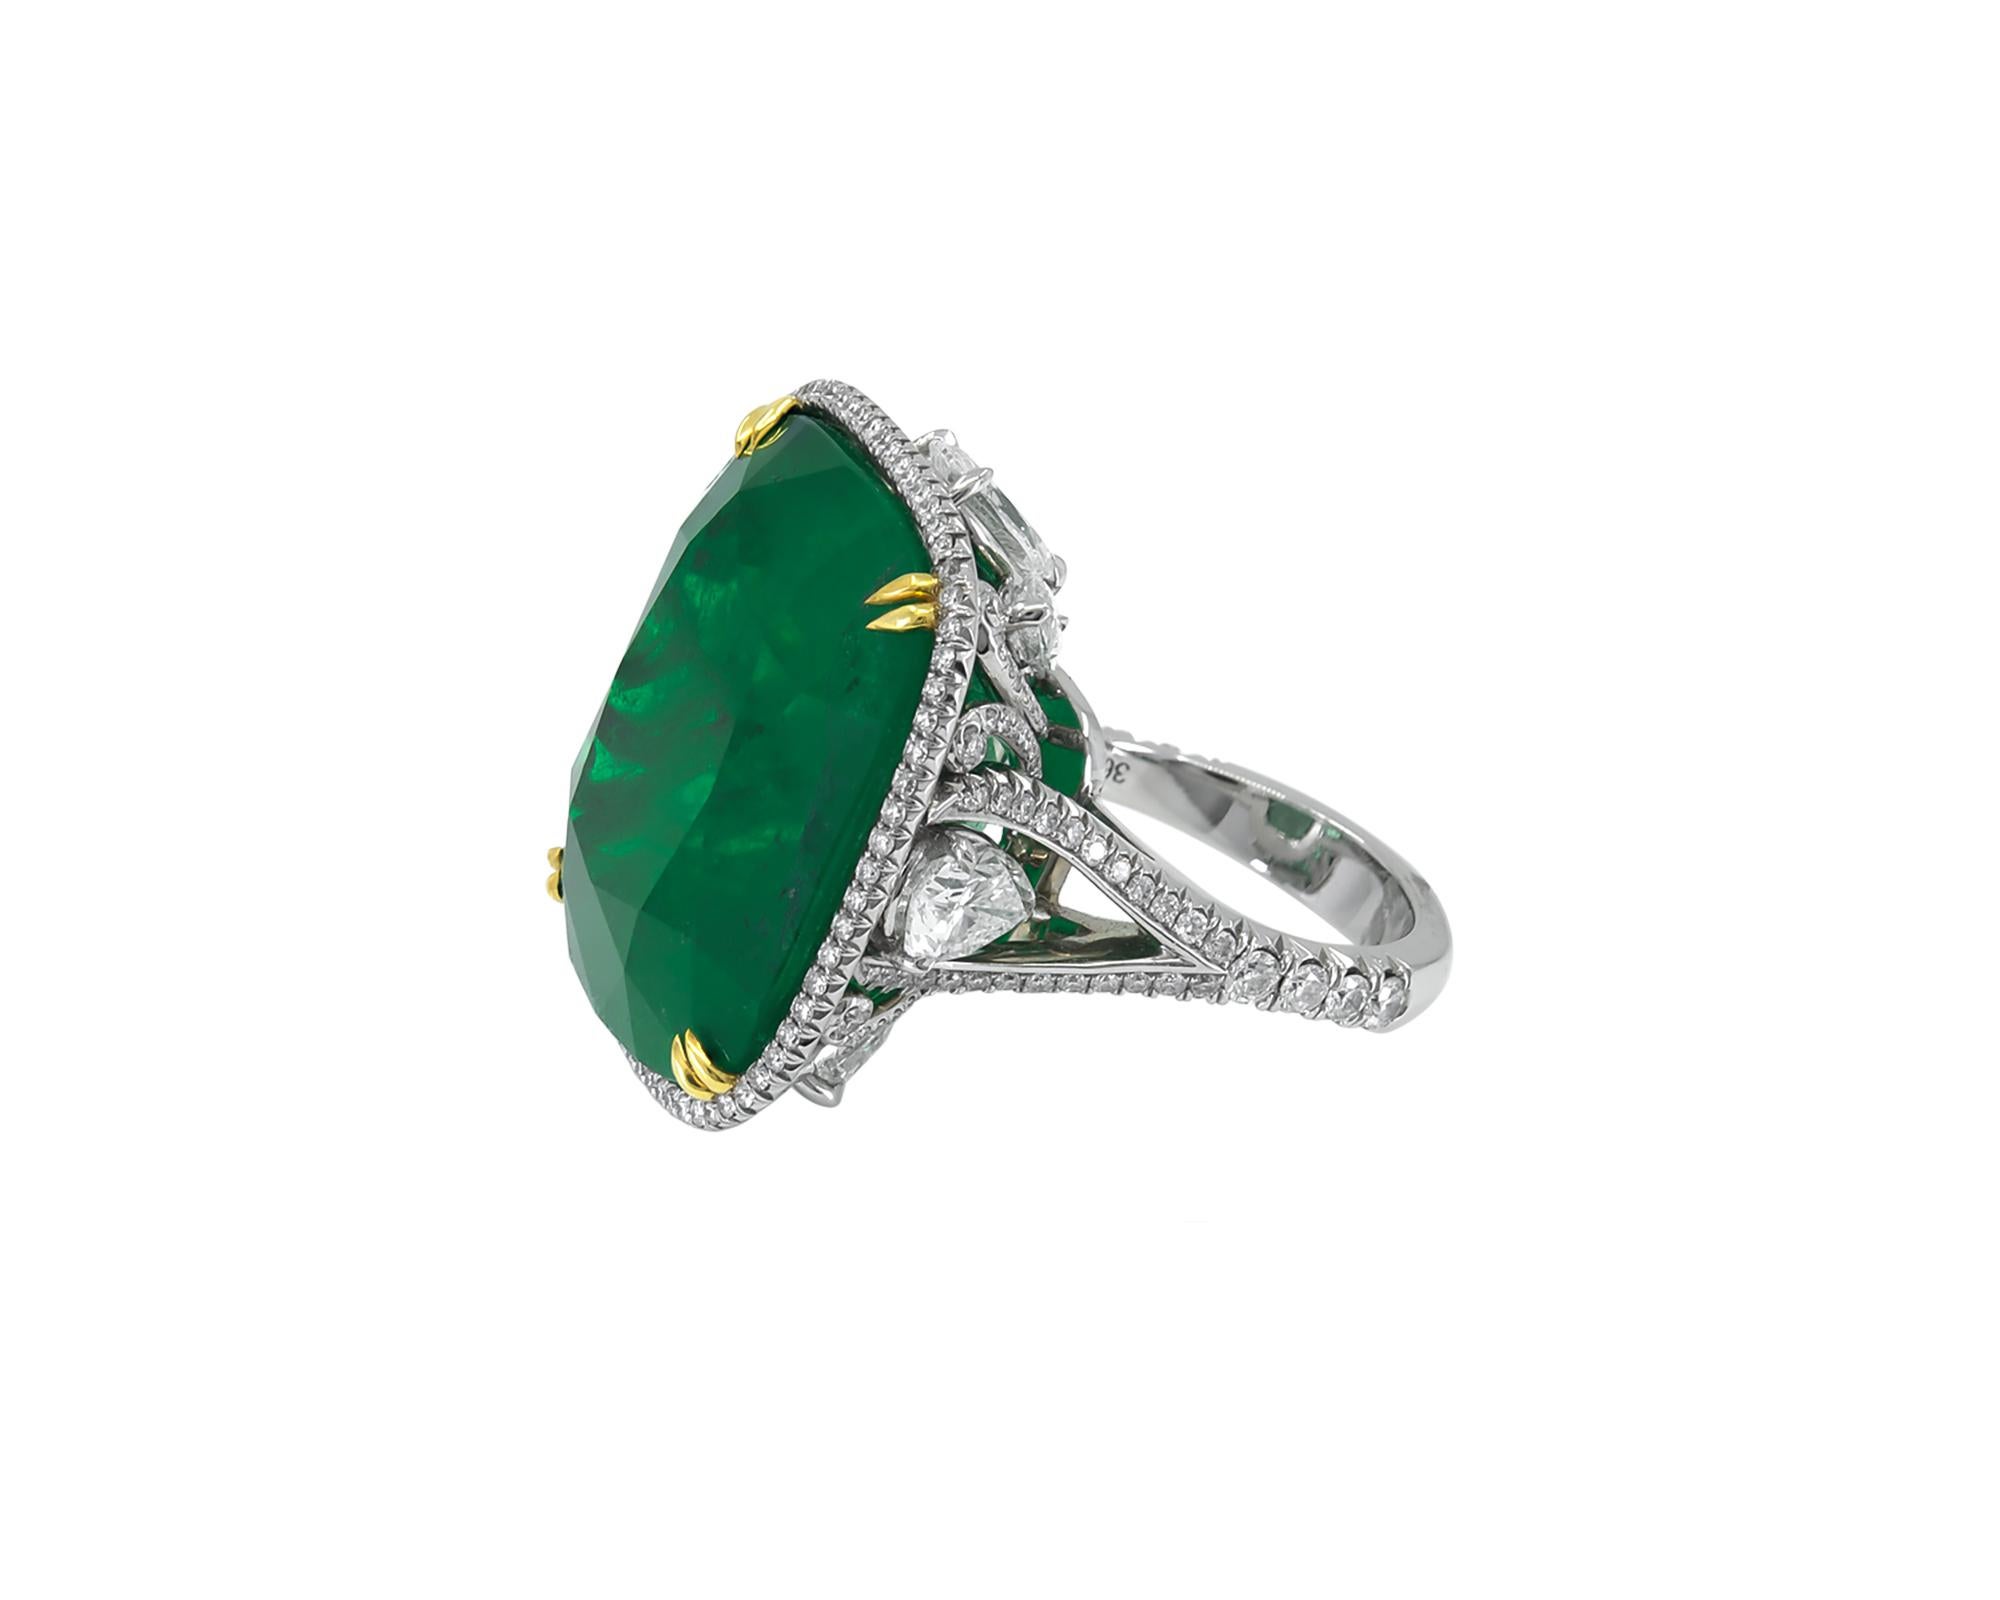 A magnificent ring comprising of a cushion emerald and diamonds. The emerald is of Colombian origin weighing 36.29 carats total. The emerald is set in a mounting beautifully decorated with 4 marquise-shaped diamonds weighing 1.31 carats, 4